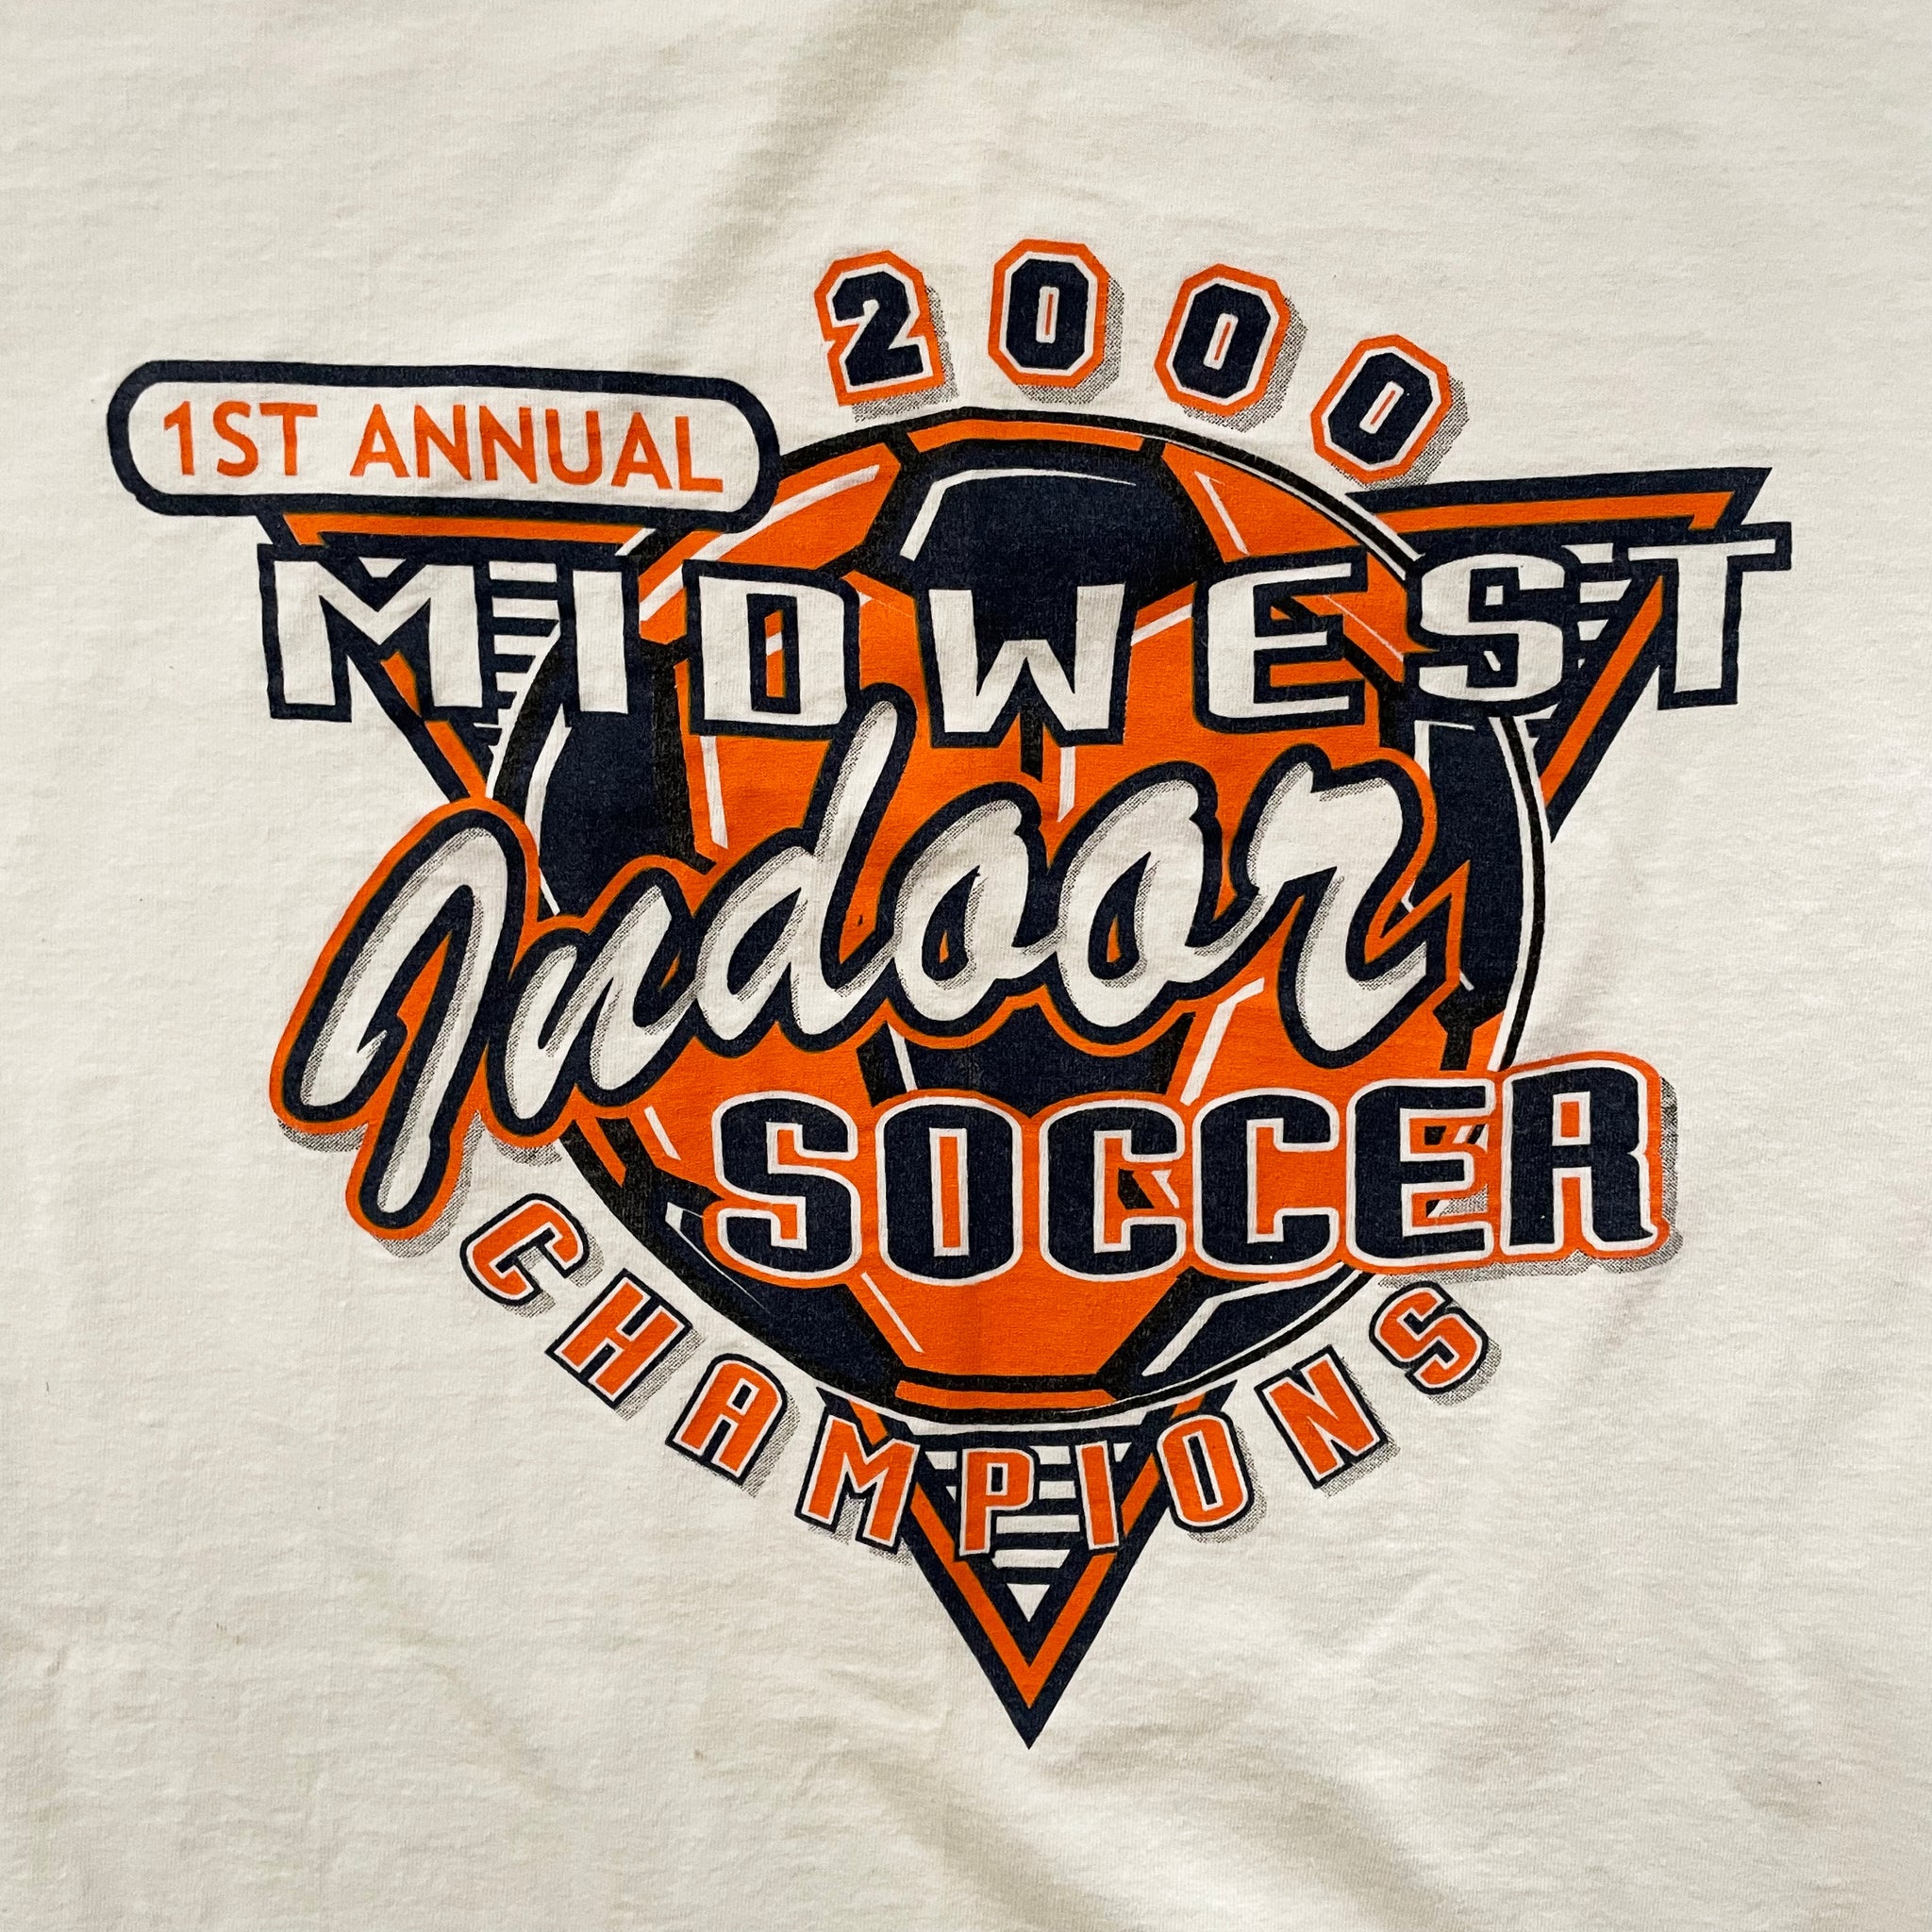 Midwest Indoor Soccer Champs T-Shirt - XL